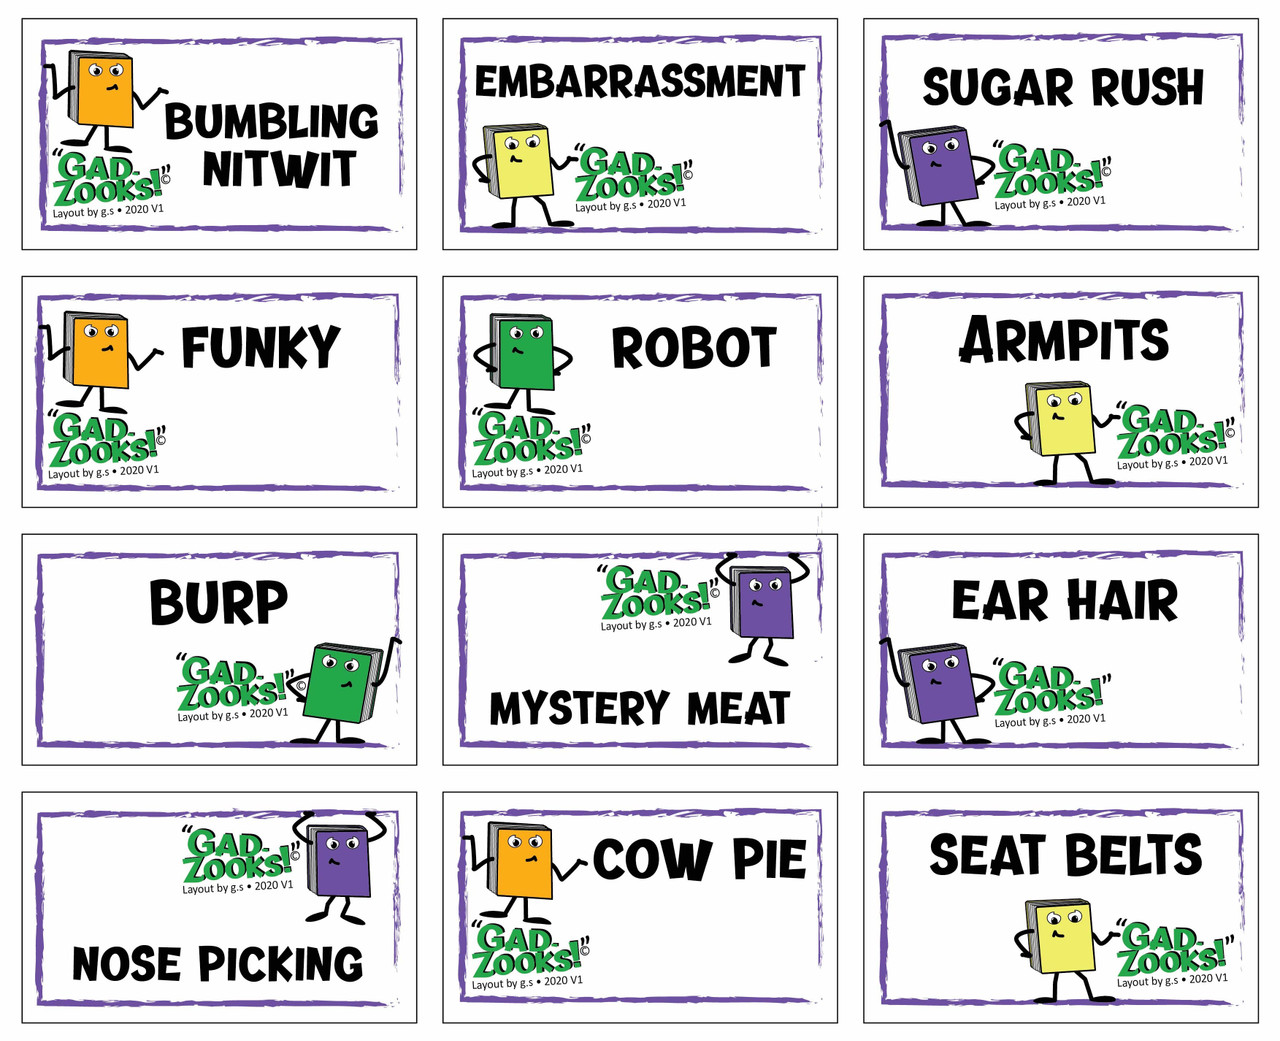 Here are just a few examples of the 180 prompt cards included with this game.